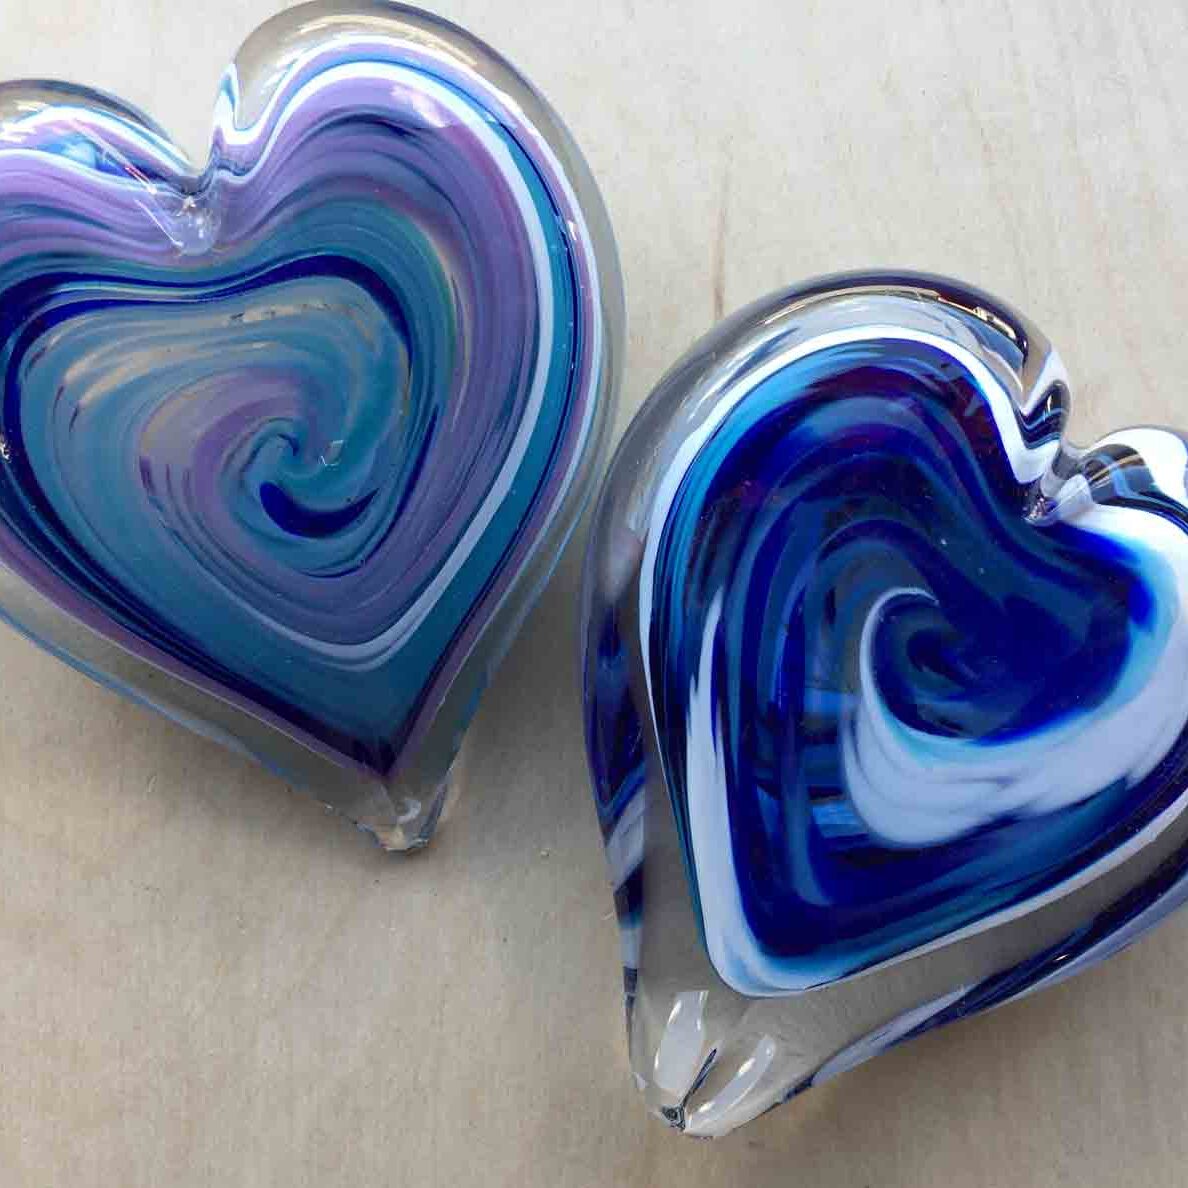 At florida glass house you have an array of objects to make with your loved one